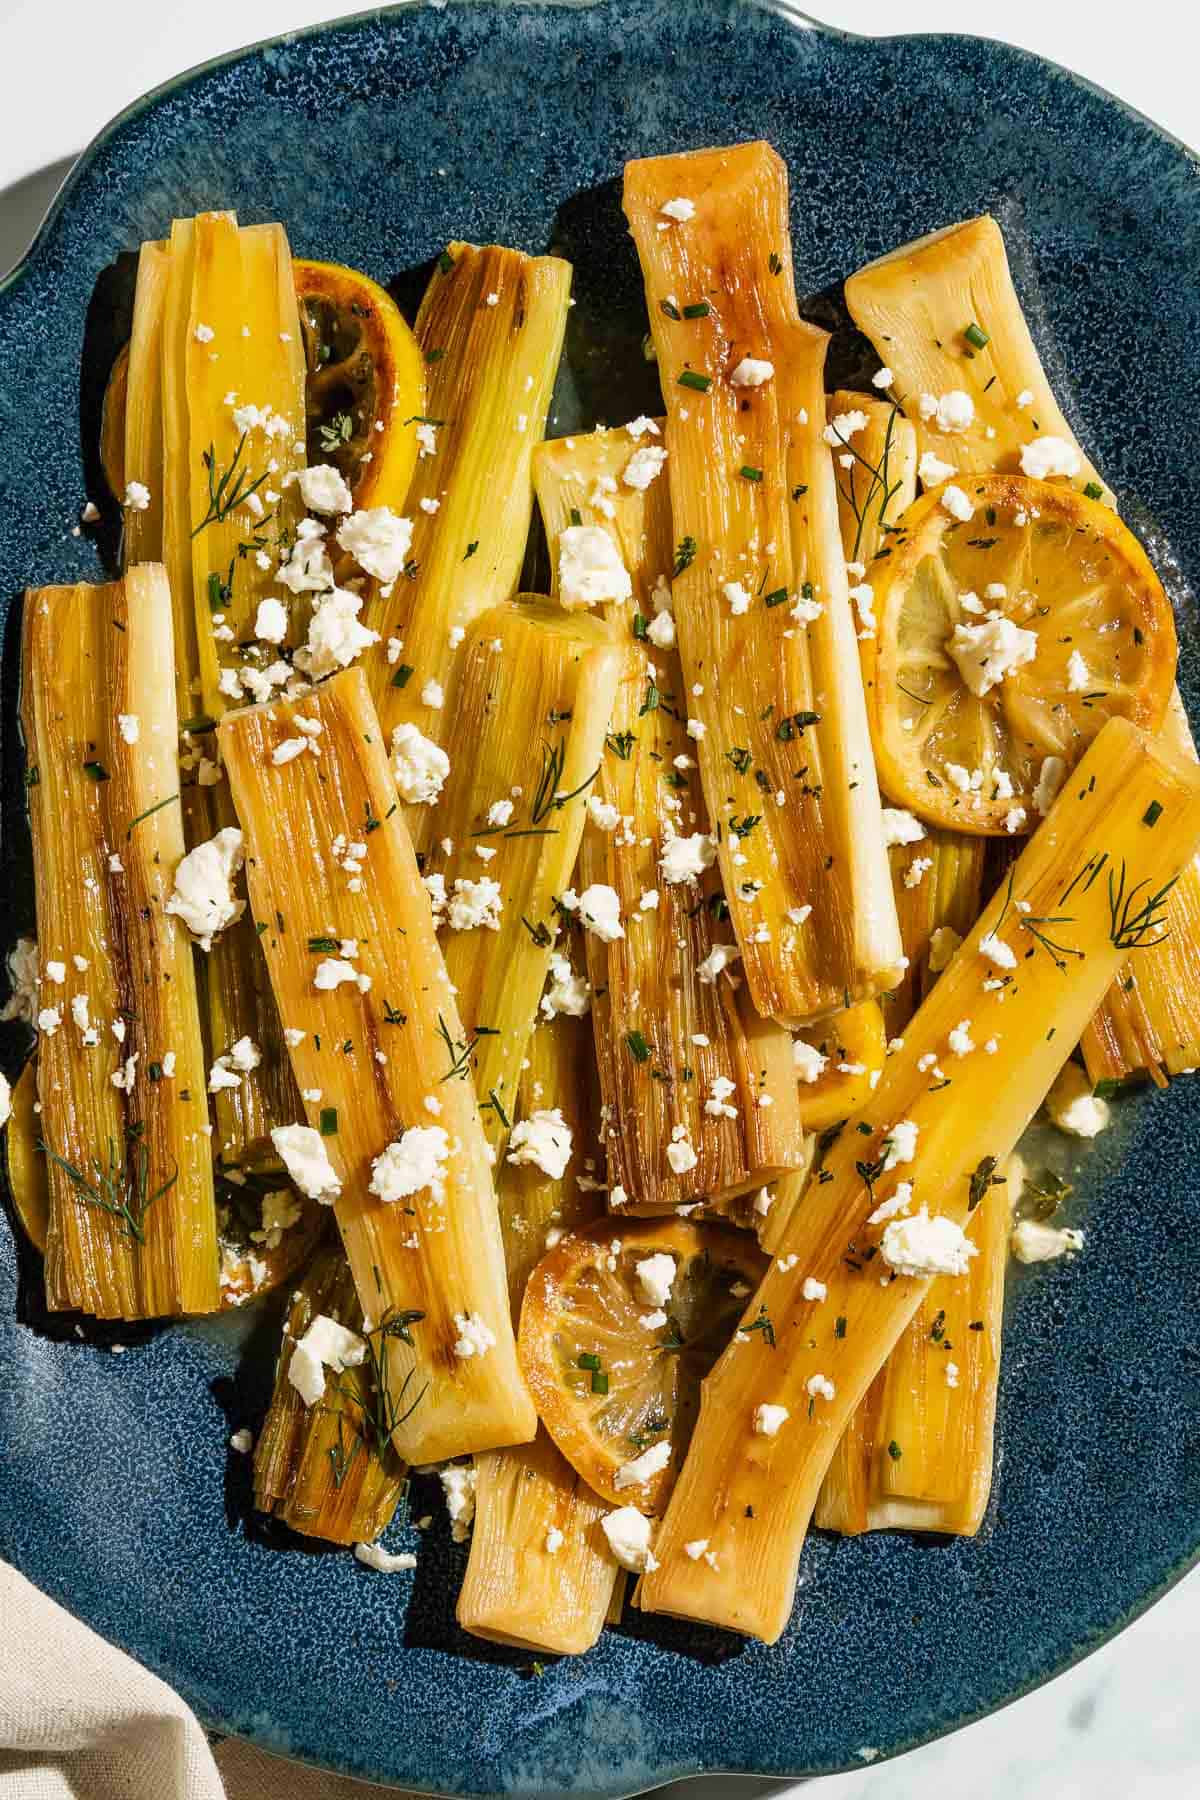 An overhead photo of braised leeks garnished with dill, crumbled feta and lemon slices on a blue serving platter.